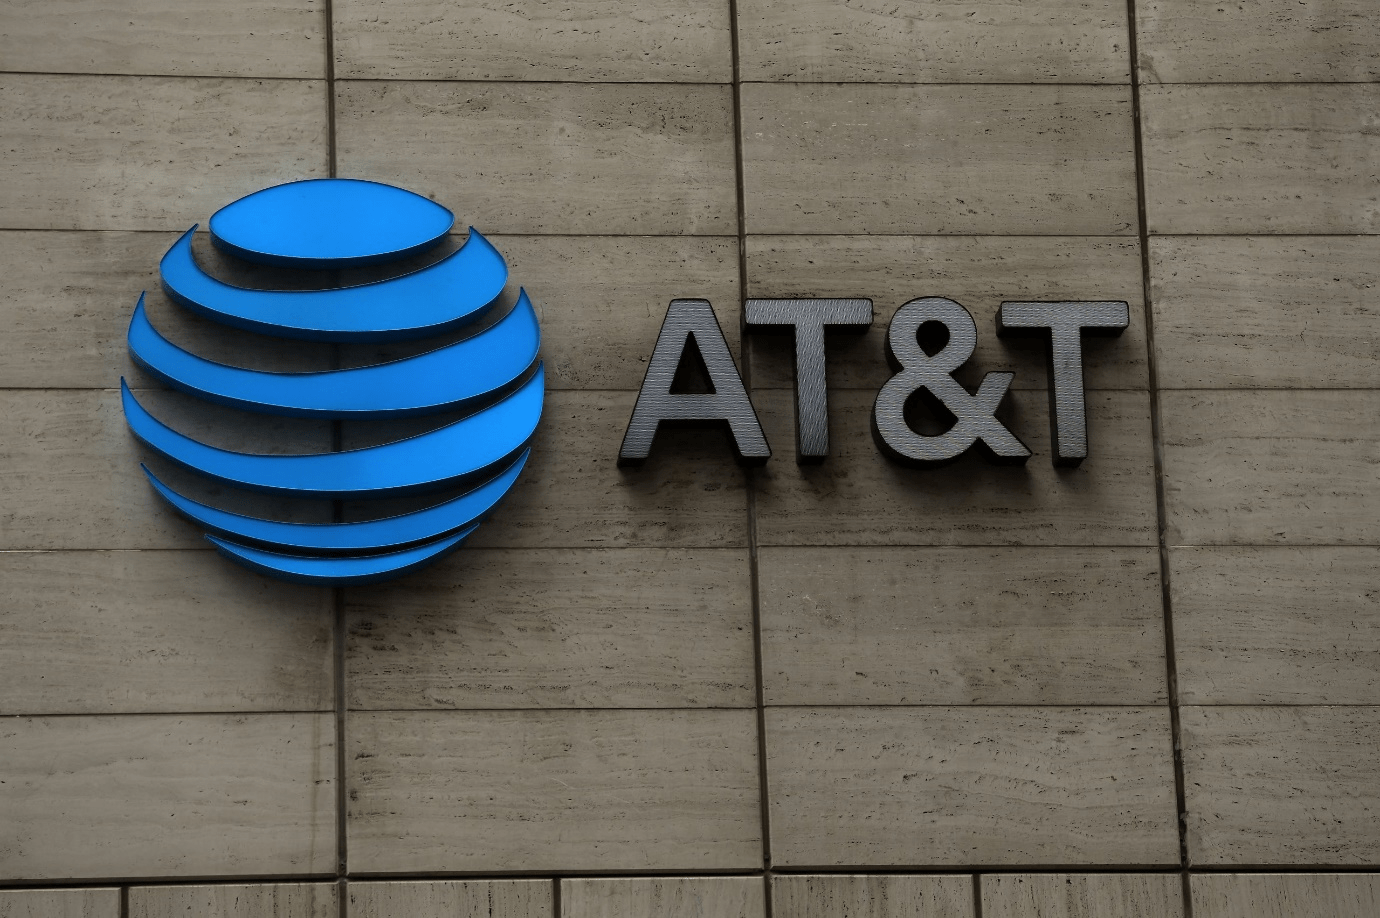 AT&T announces a $43 billion deal to merge WarnerMedia with Discovery